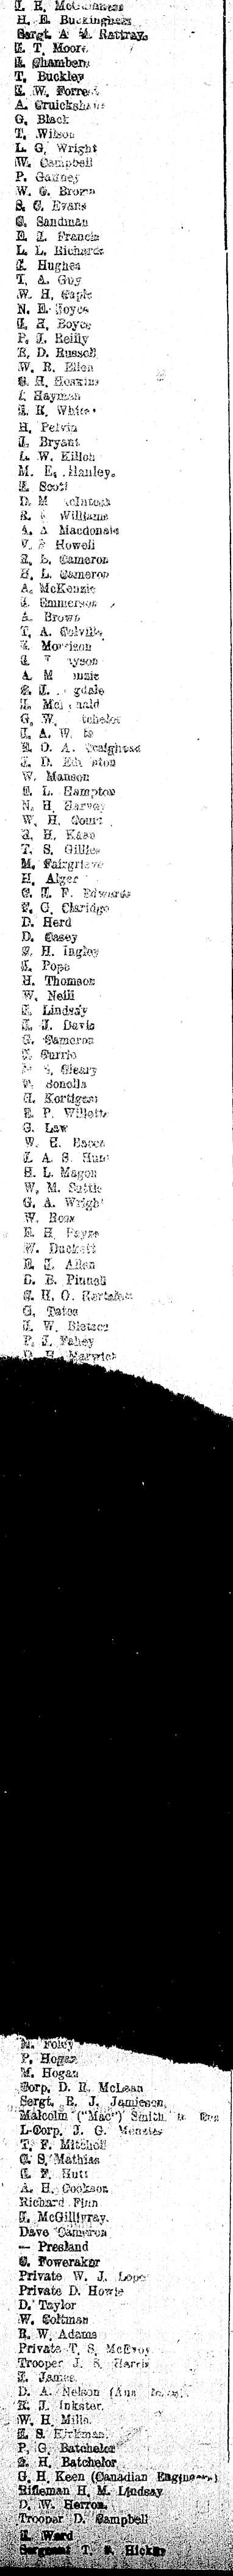 Papers Past Newspapers Waimate Daily Advertiser 19 August 1918 Waimate S Roll Of Honour